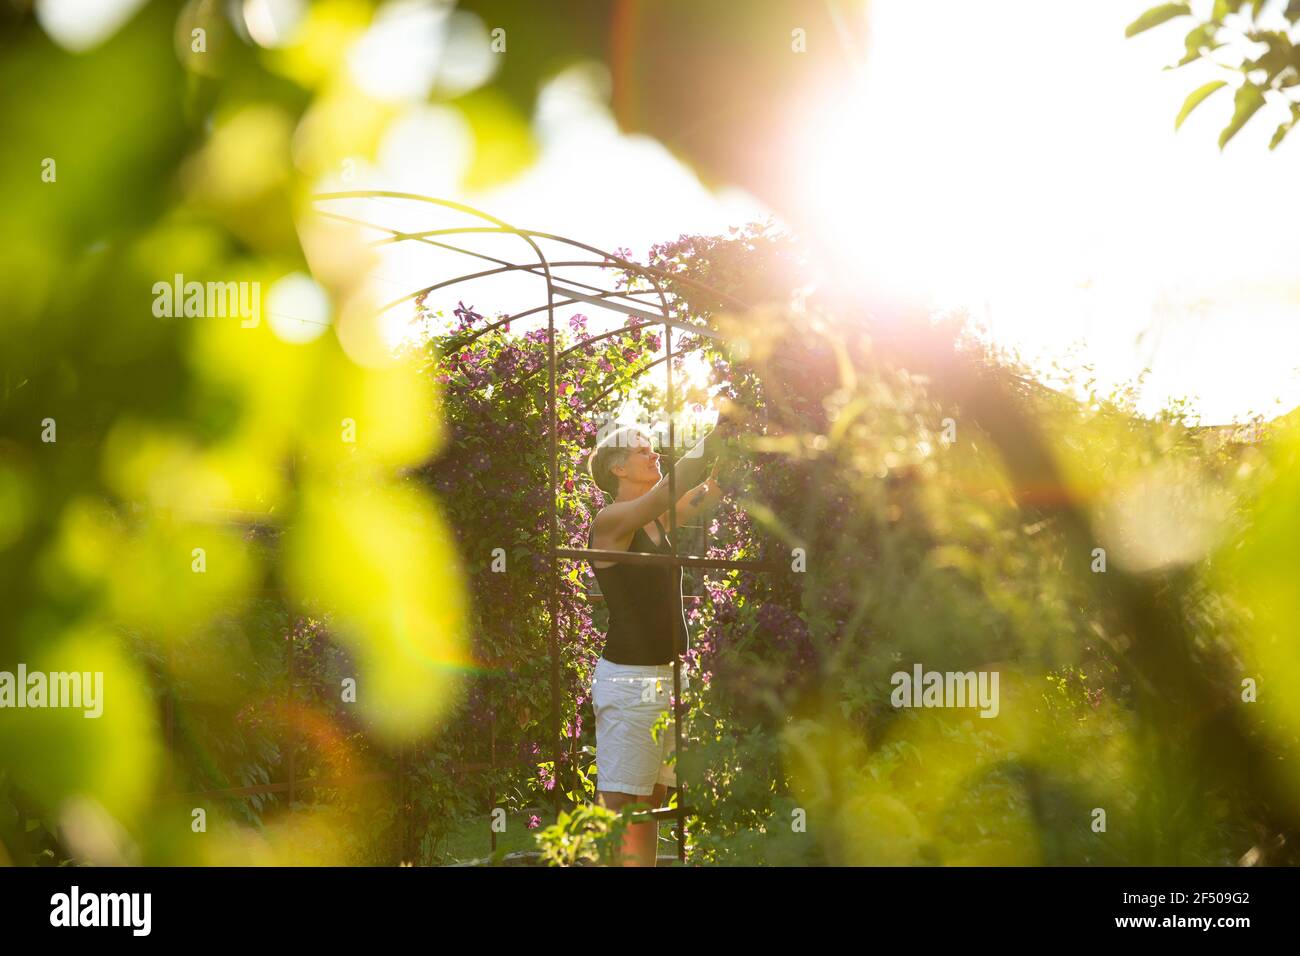 Woman pruning flowers owing on trellis in sunny garden Stock Photo